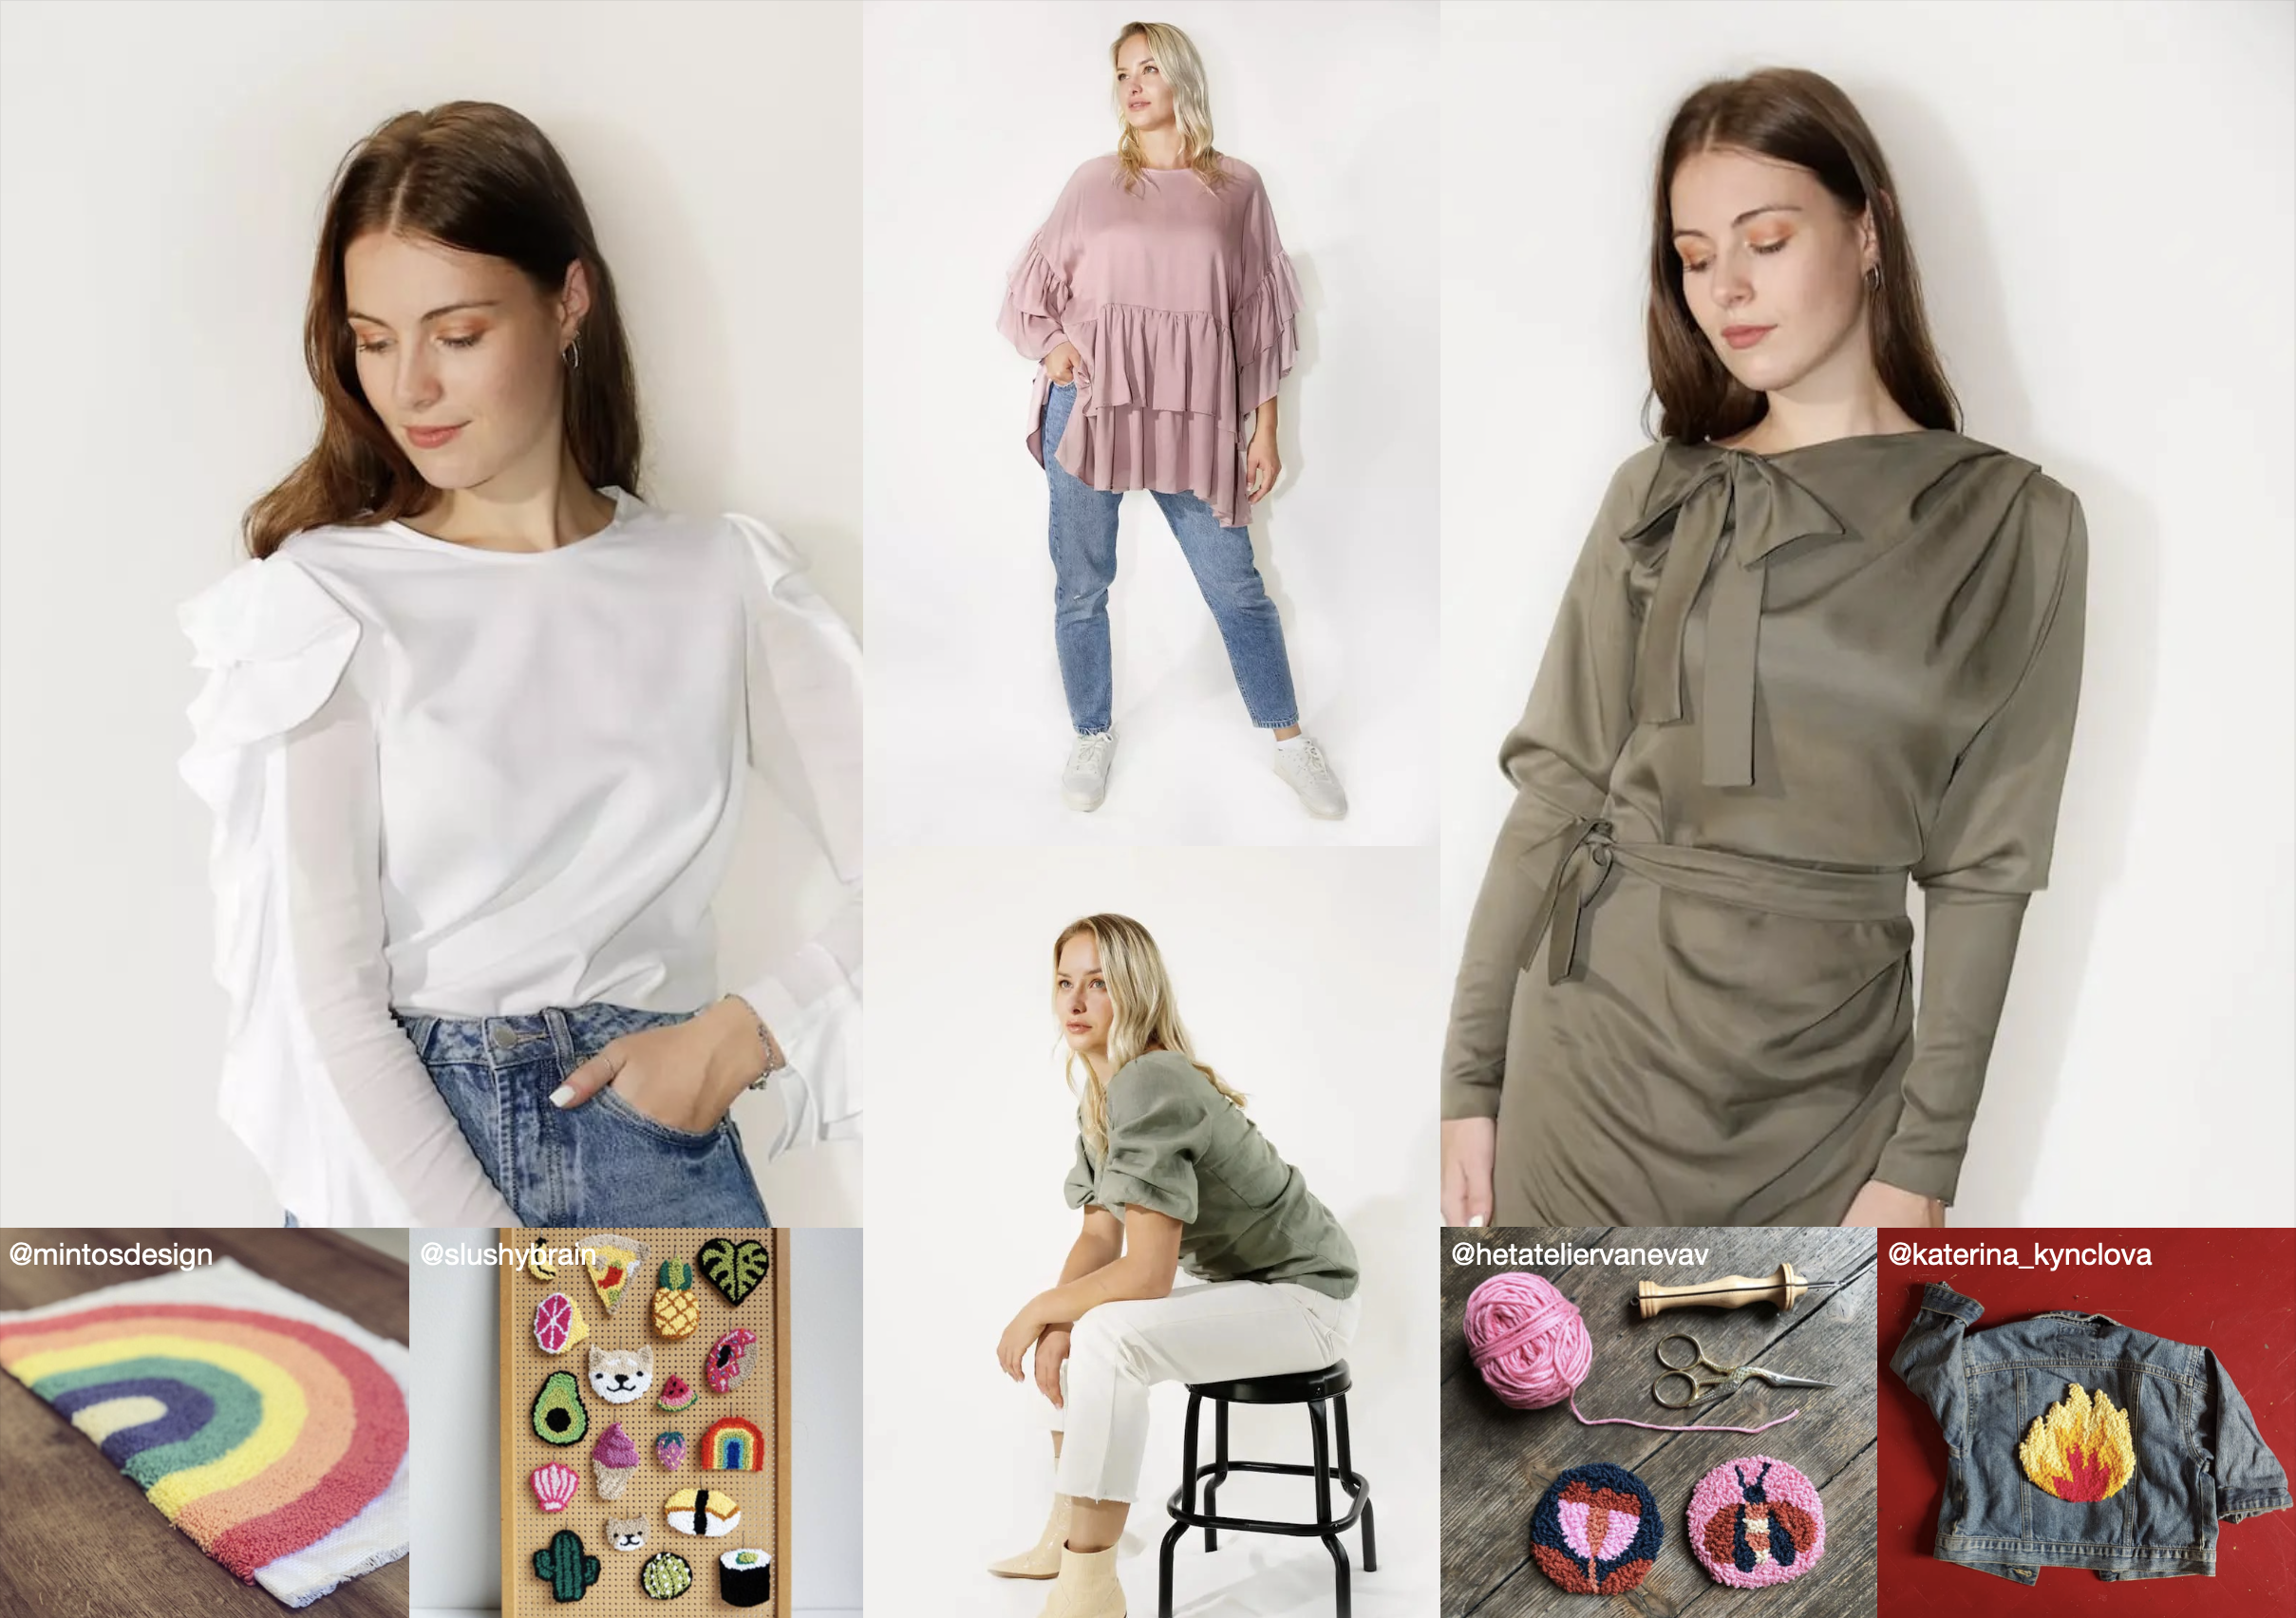 A photo of a mood board featuring photos of models wearing dresses with ruffles and needlepunch pieces of a rainbow, a rainbow, flowers and more.